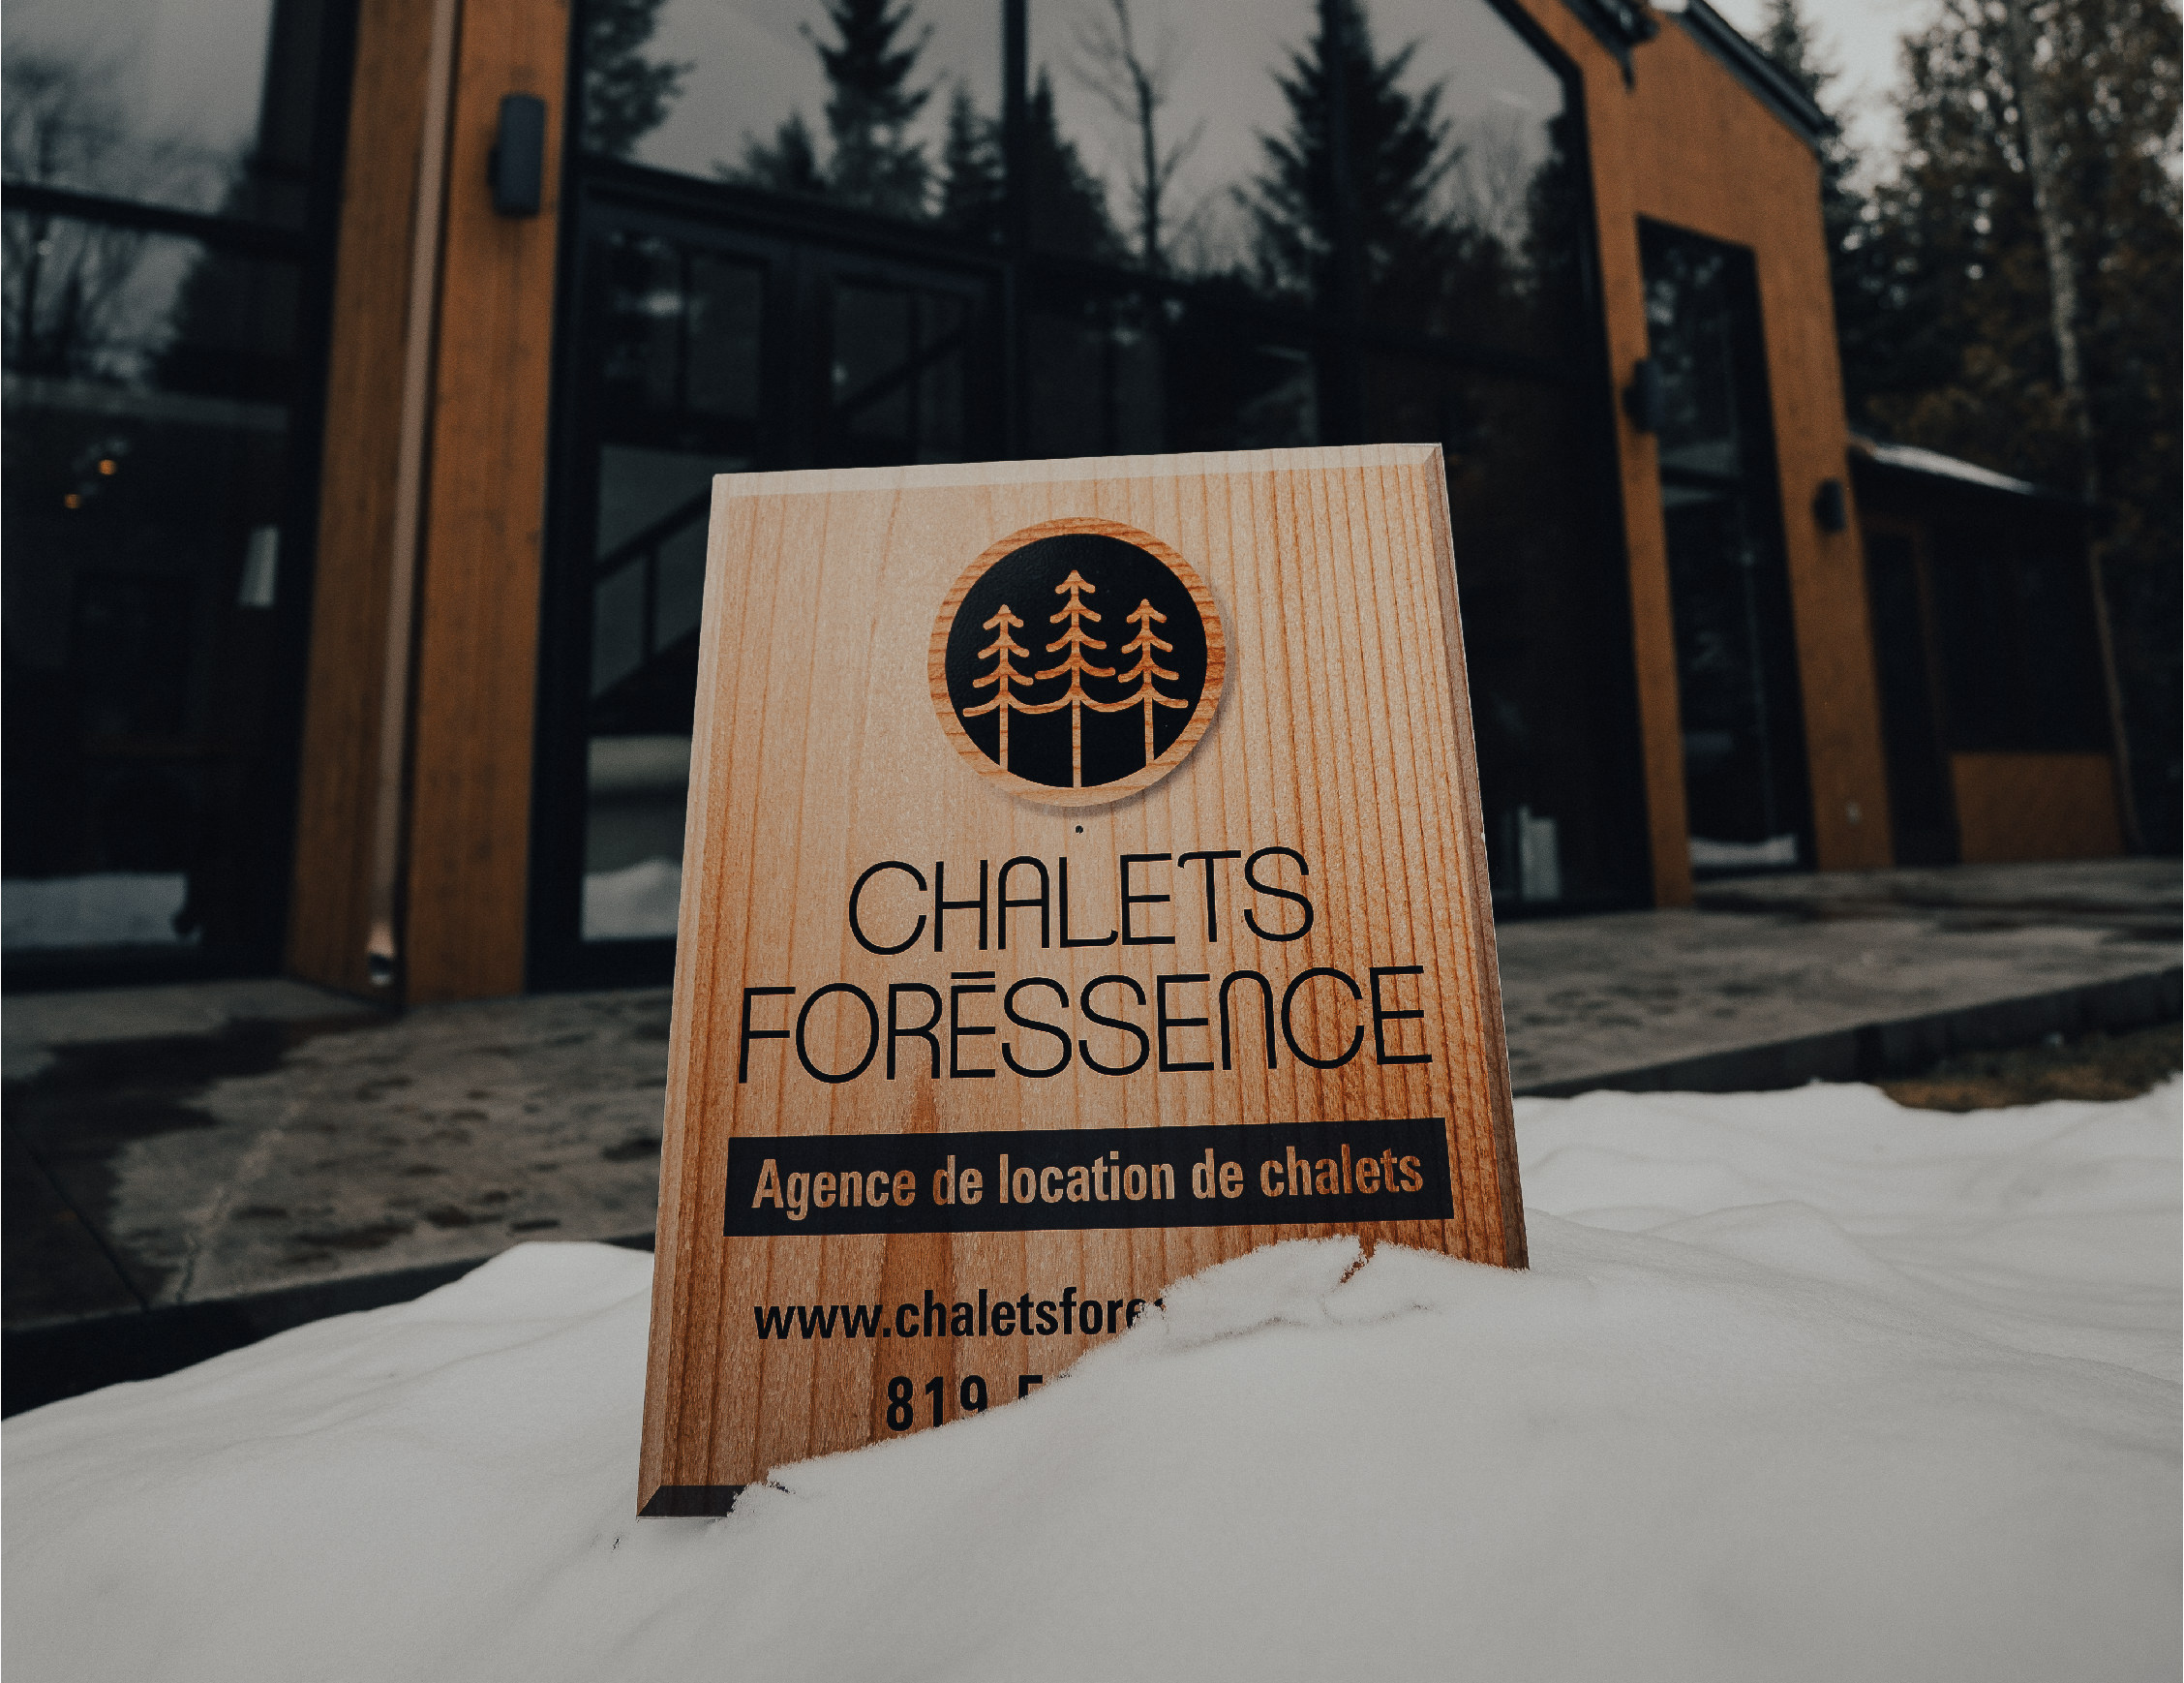 A-Propos_Chalets-Foressence_Agence-Location-Chalets-Mégantic